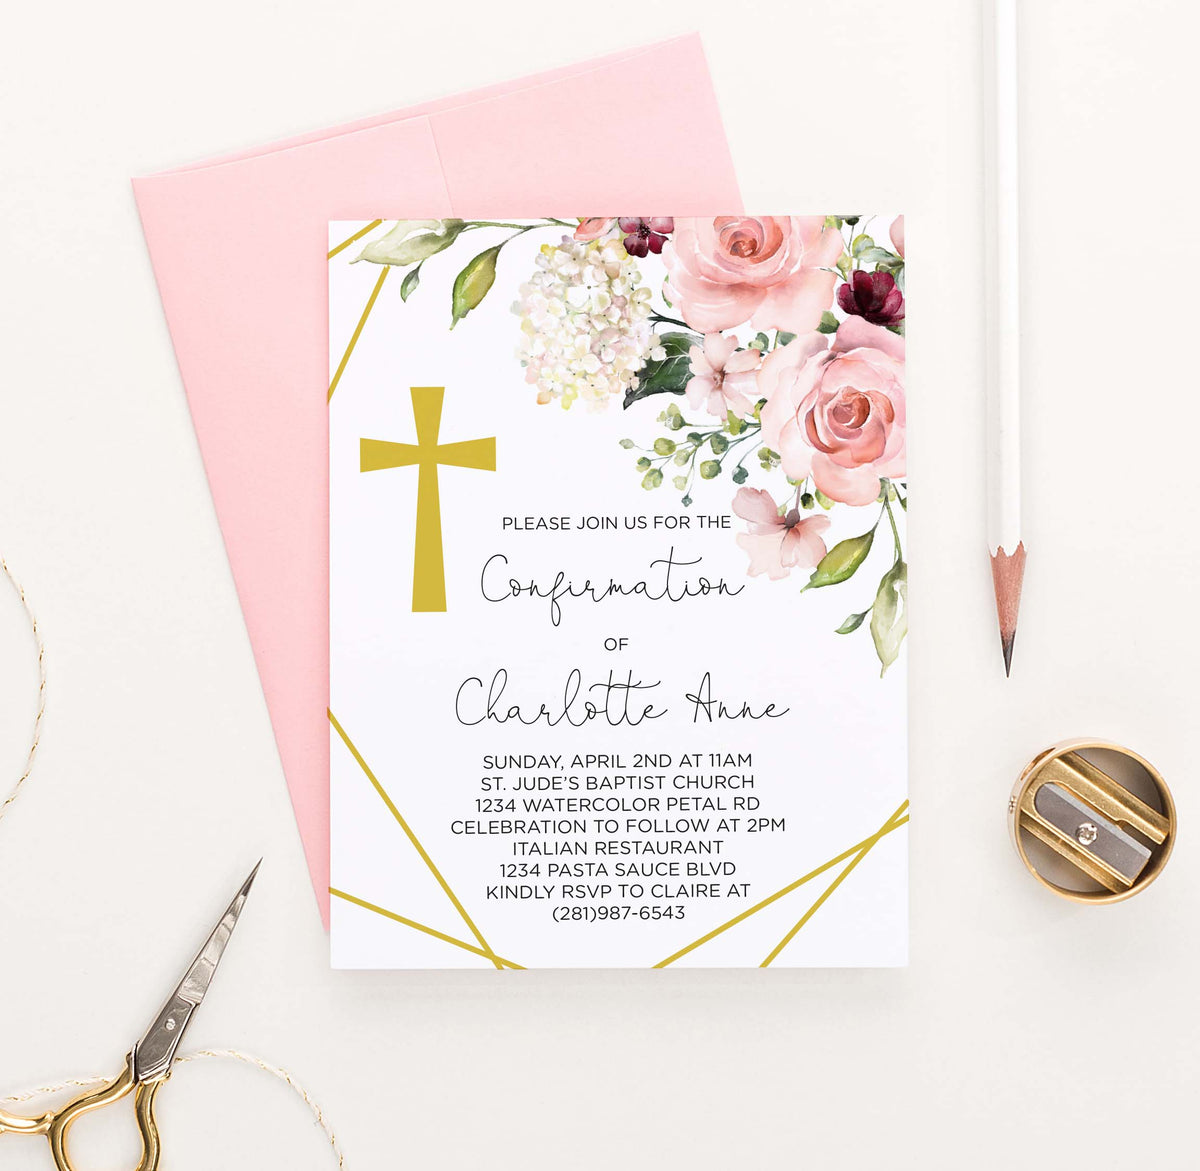 religious-invitations-tagged-confirmation-invitations-modern-pink-paper